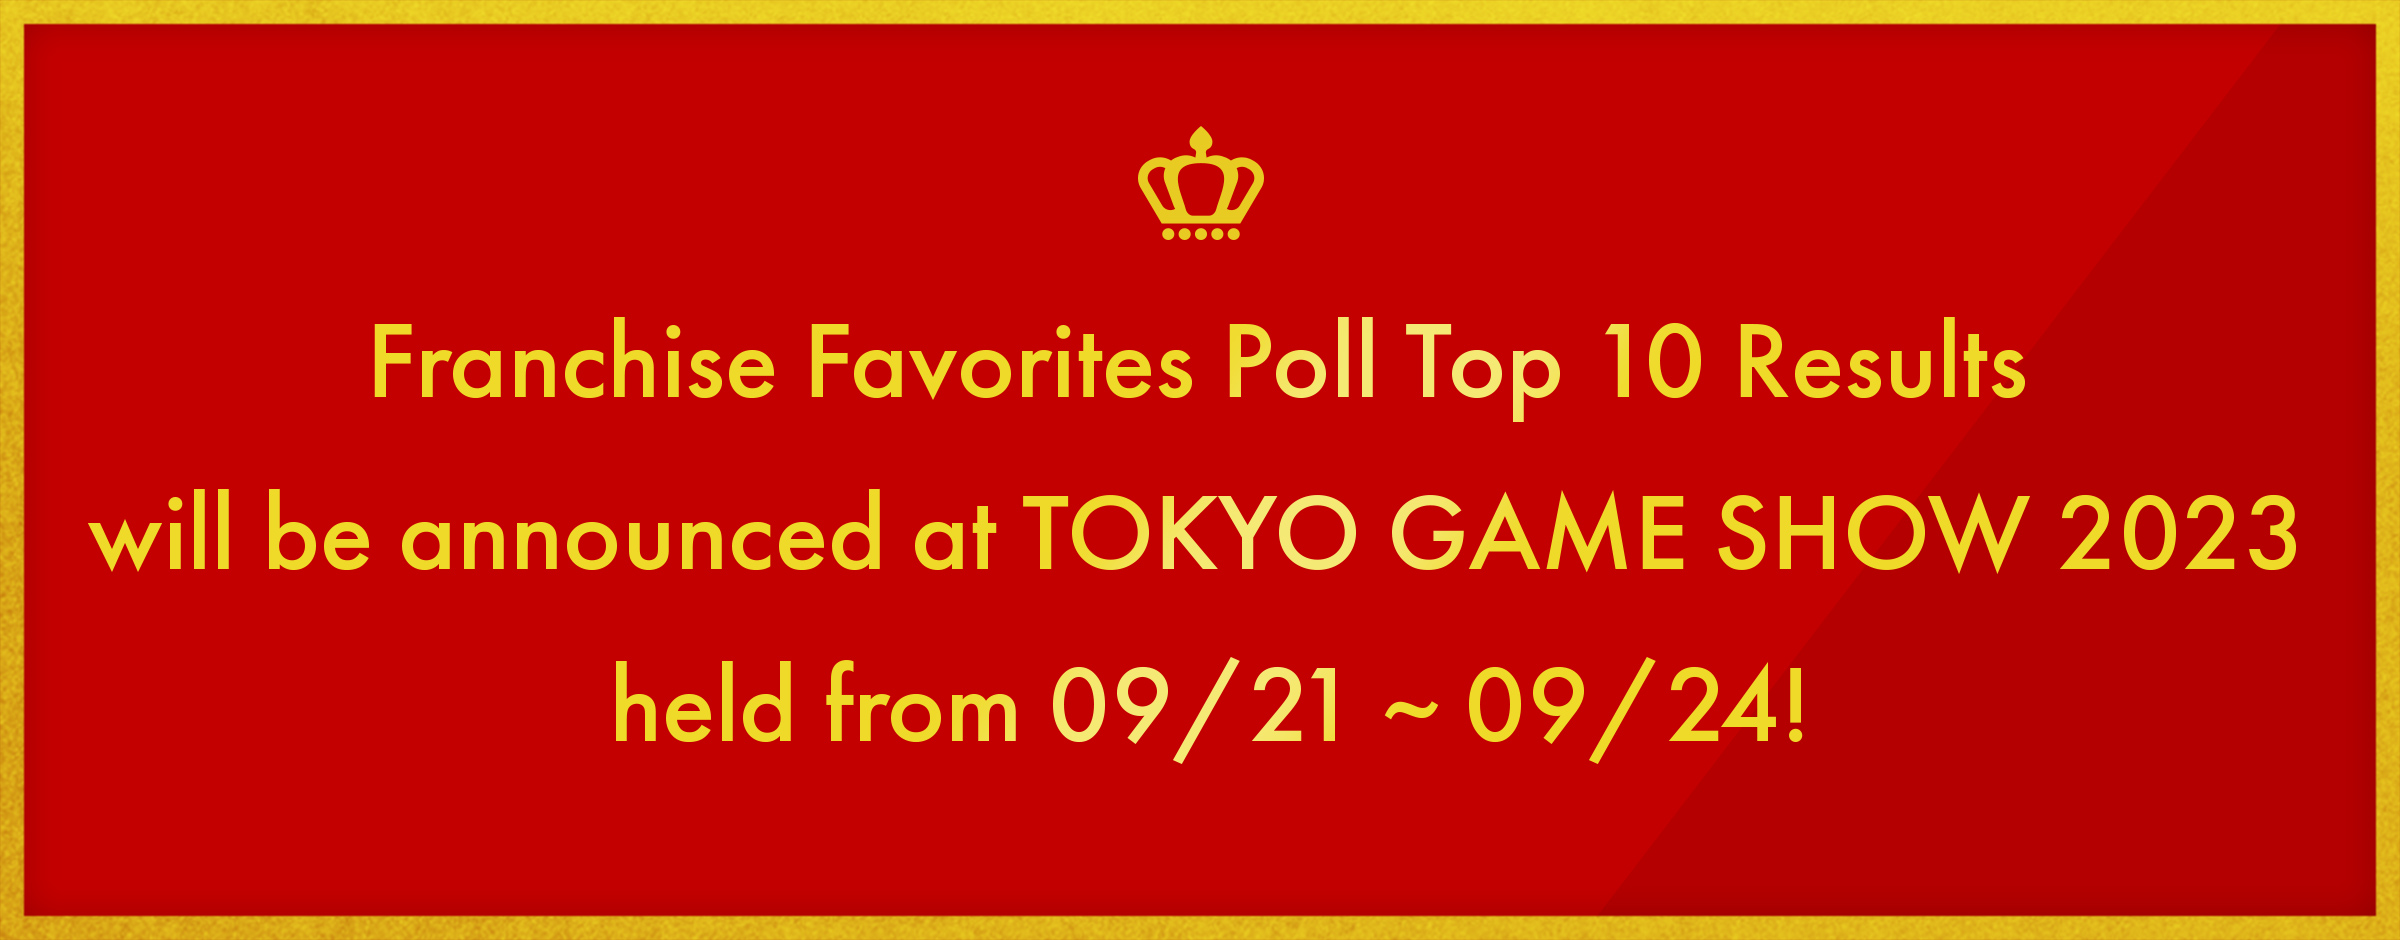 Franchise Favorites Poll Top 10 Results will be announced at TOKYO GAME SHOW 2023 held from 09/21 ~ 09/24! 